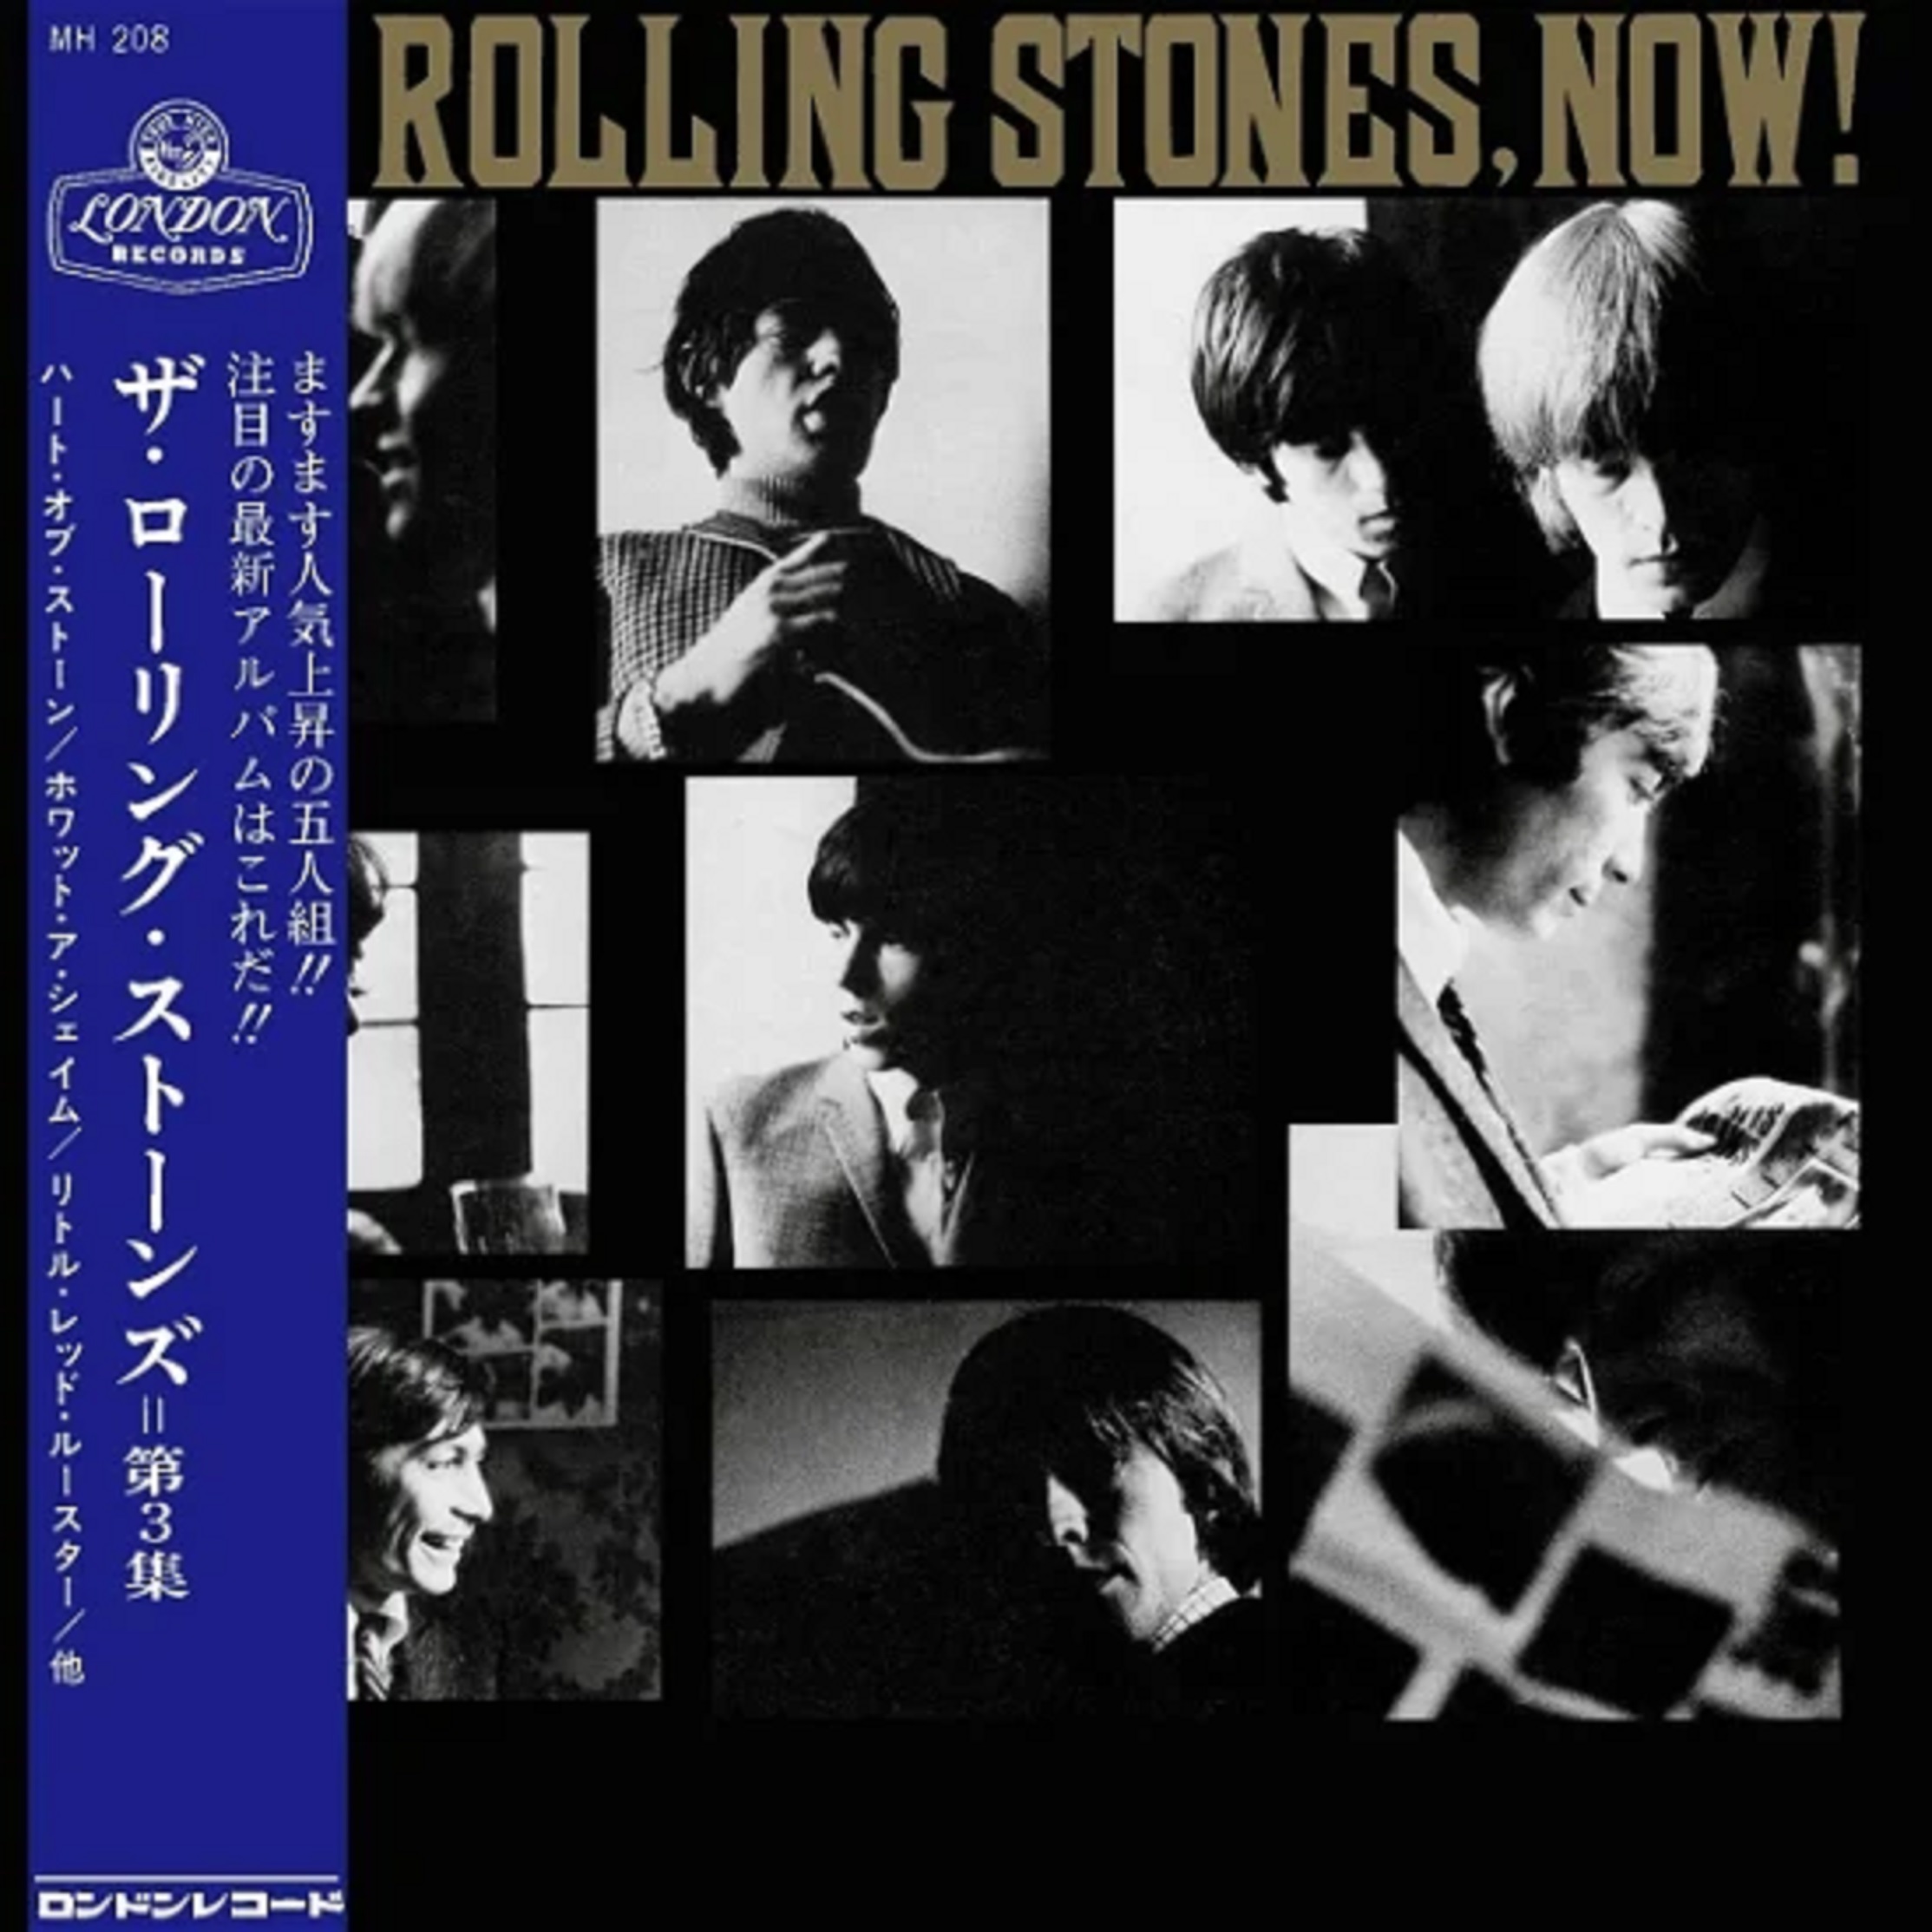 Rolling Stones, Now! | The Rolling Stones image0